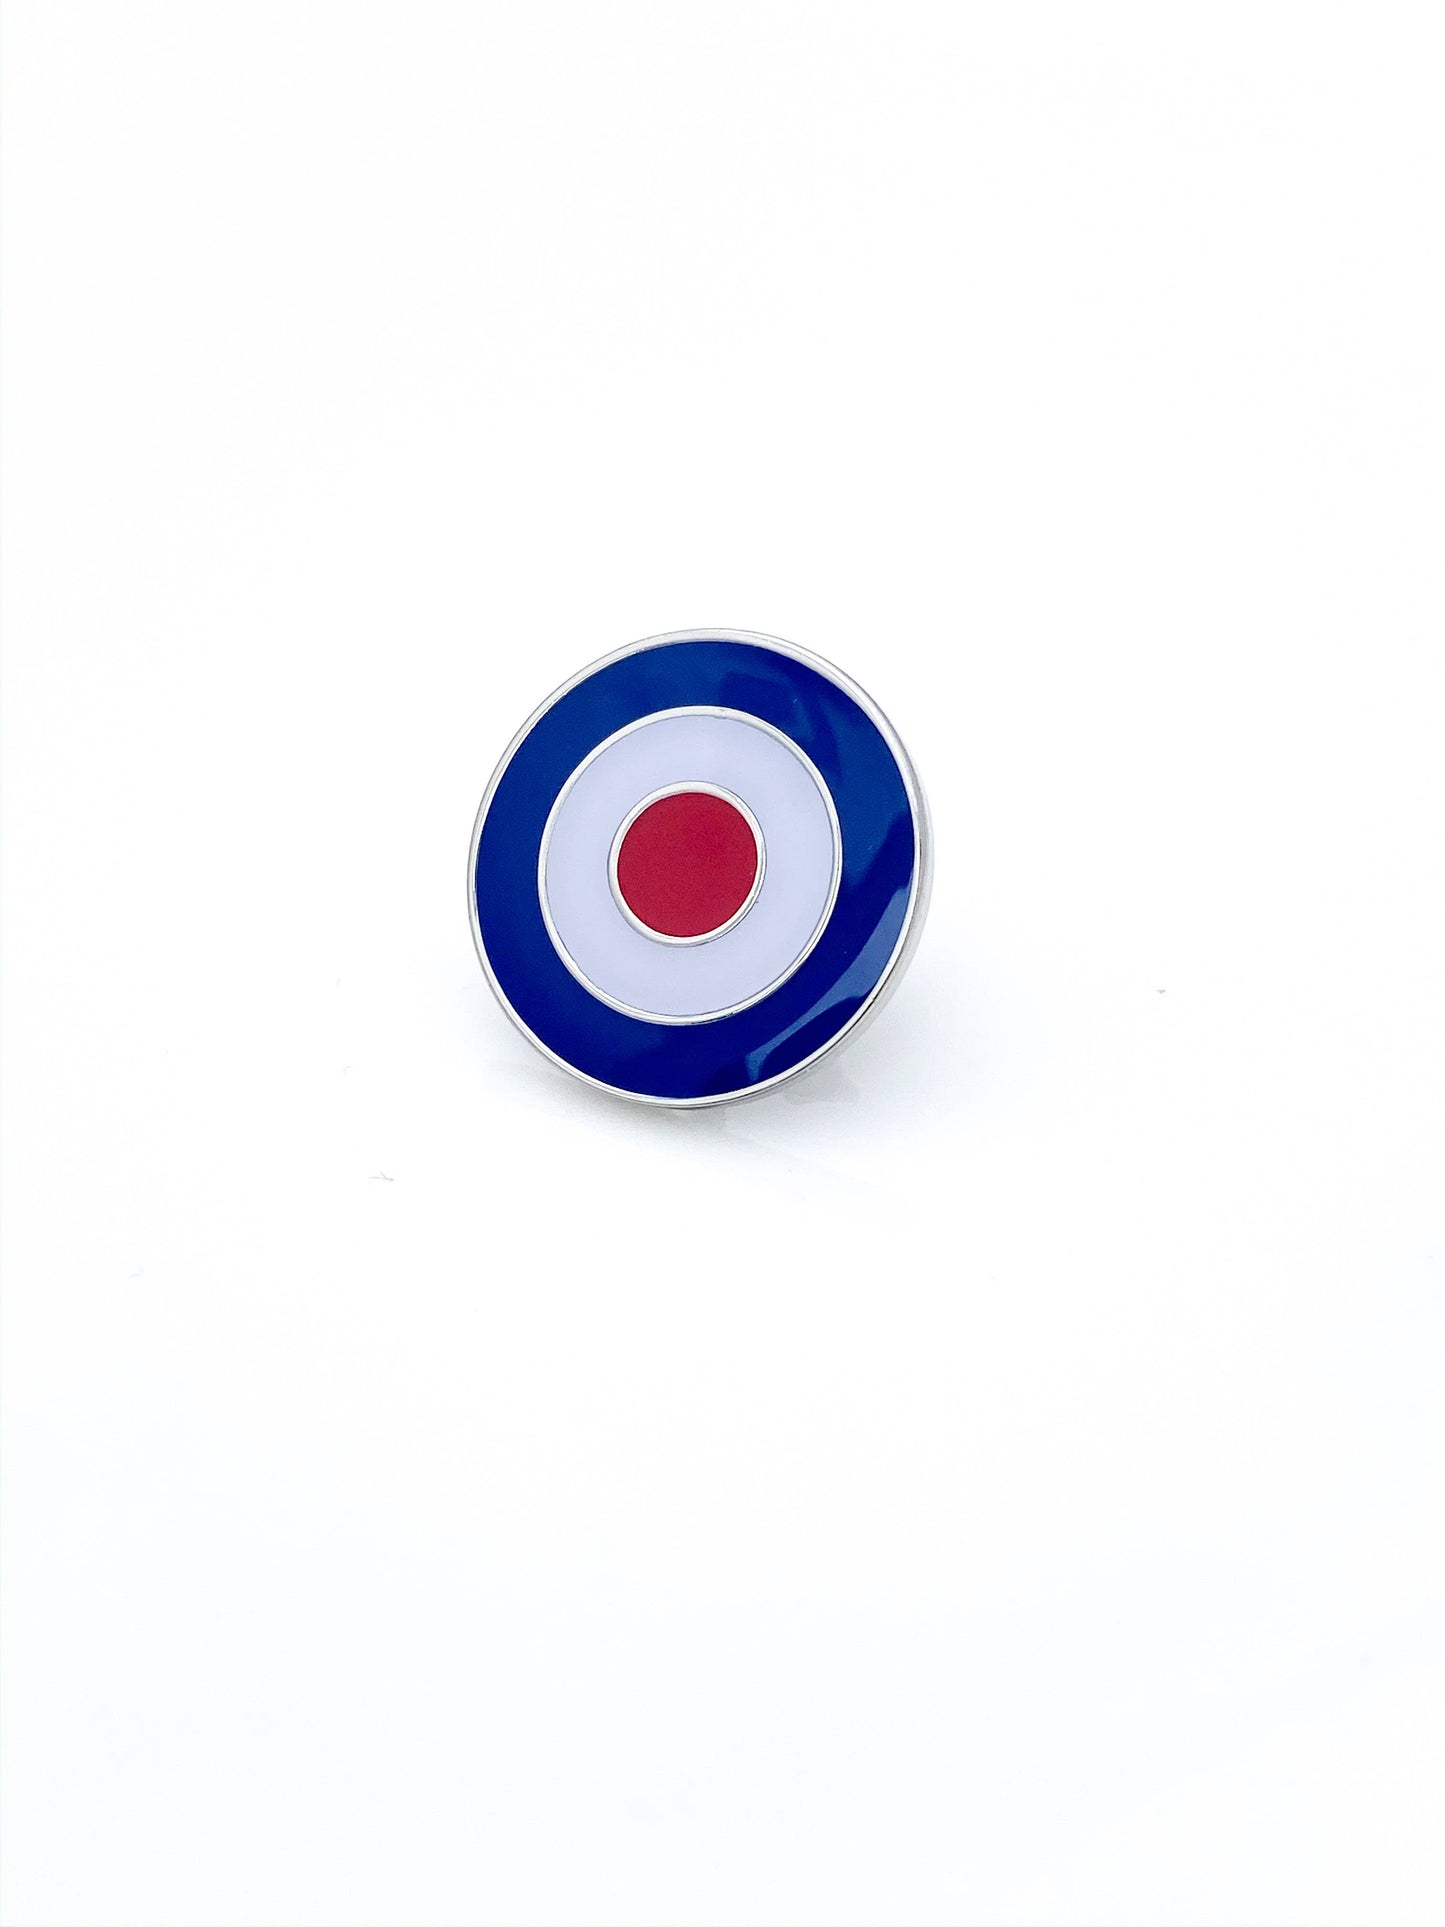 Enamel pin with the spitfire symbol